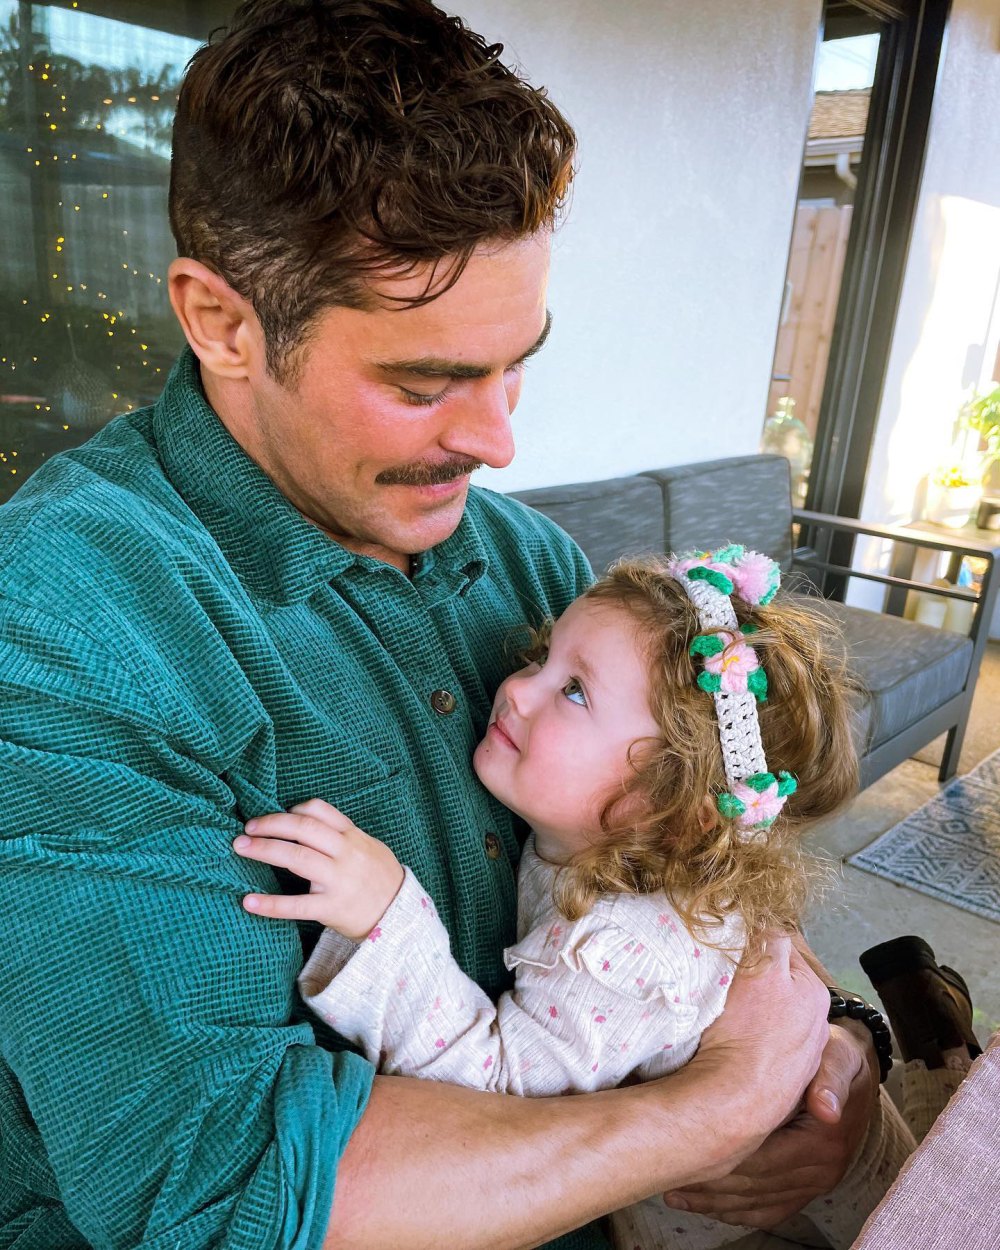 Zac Efron Cuddles Up With His Baby Sister Olivia on Her Birthday